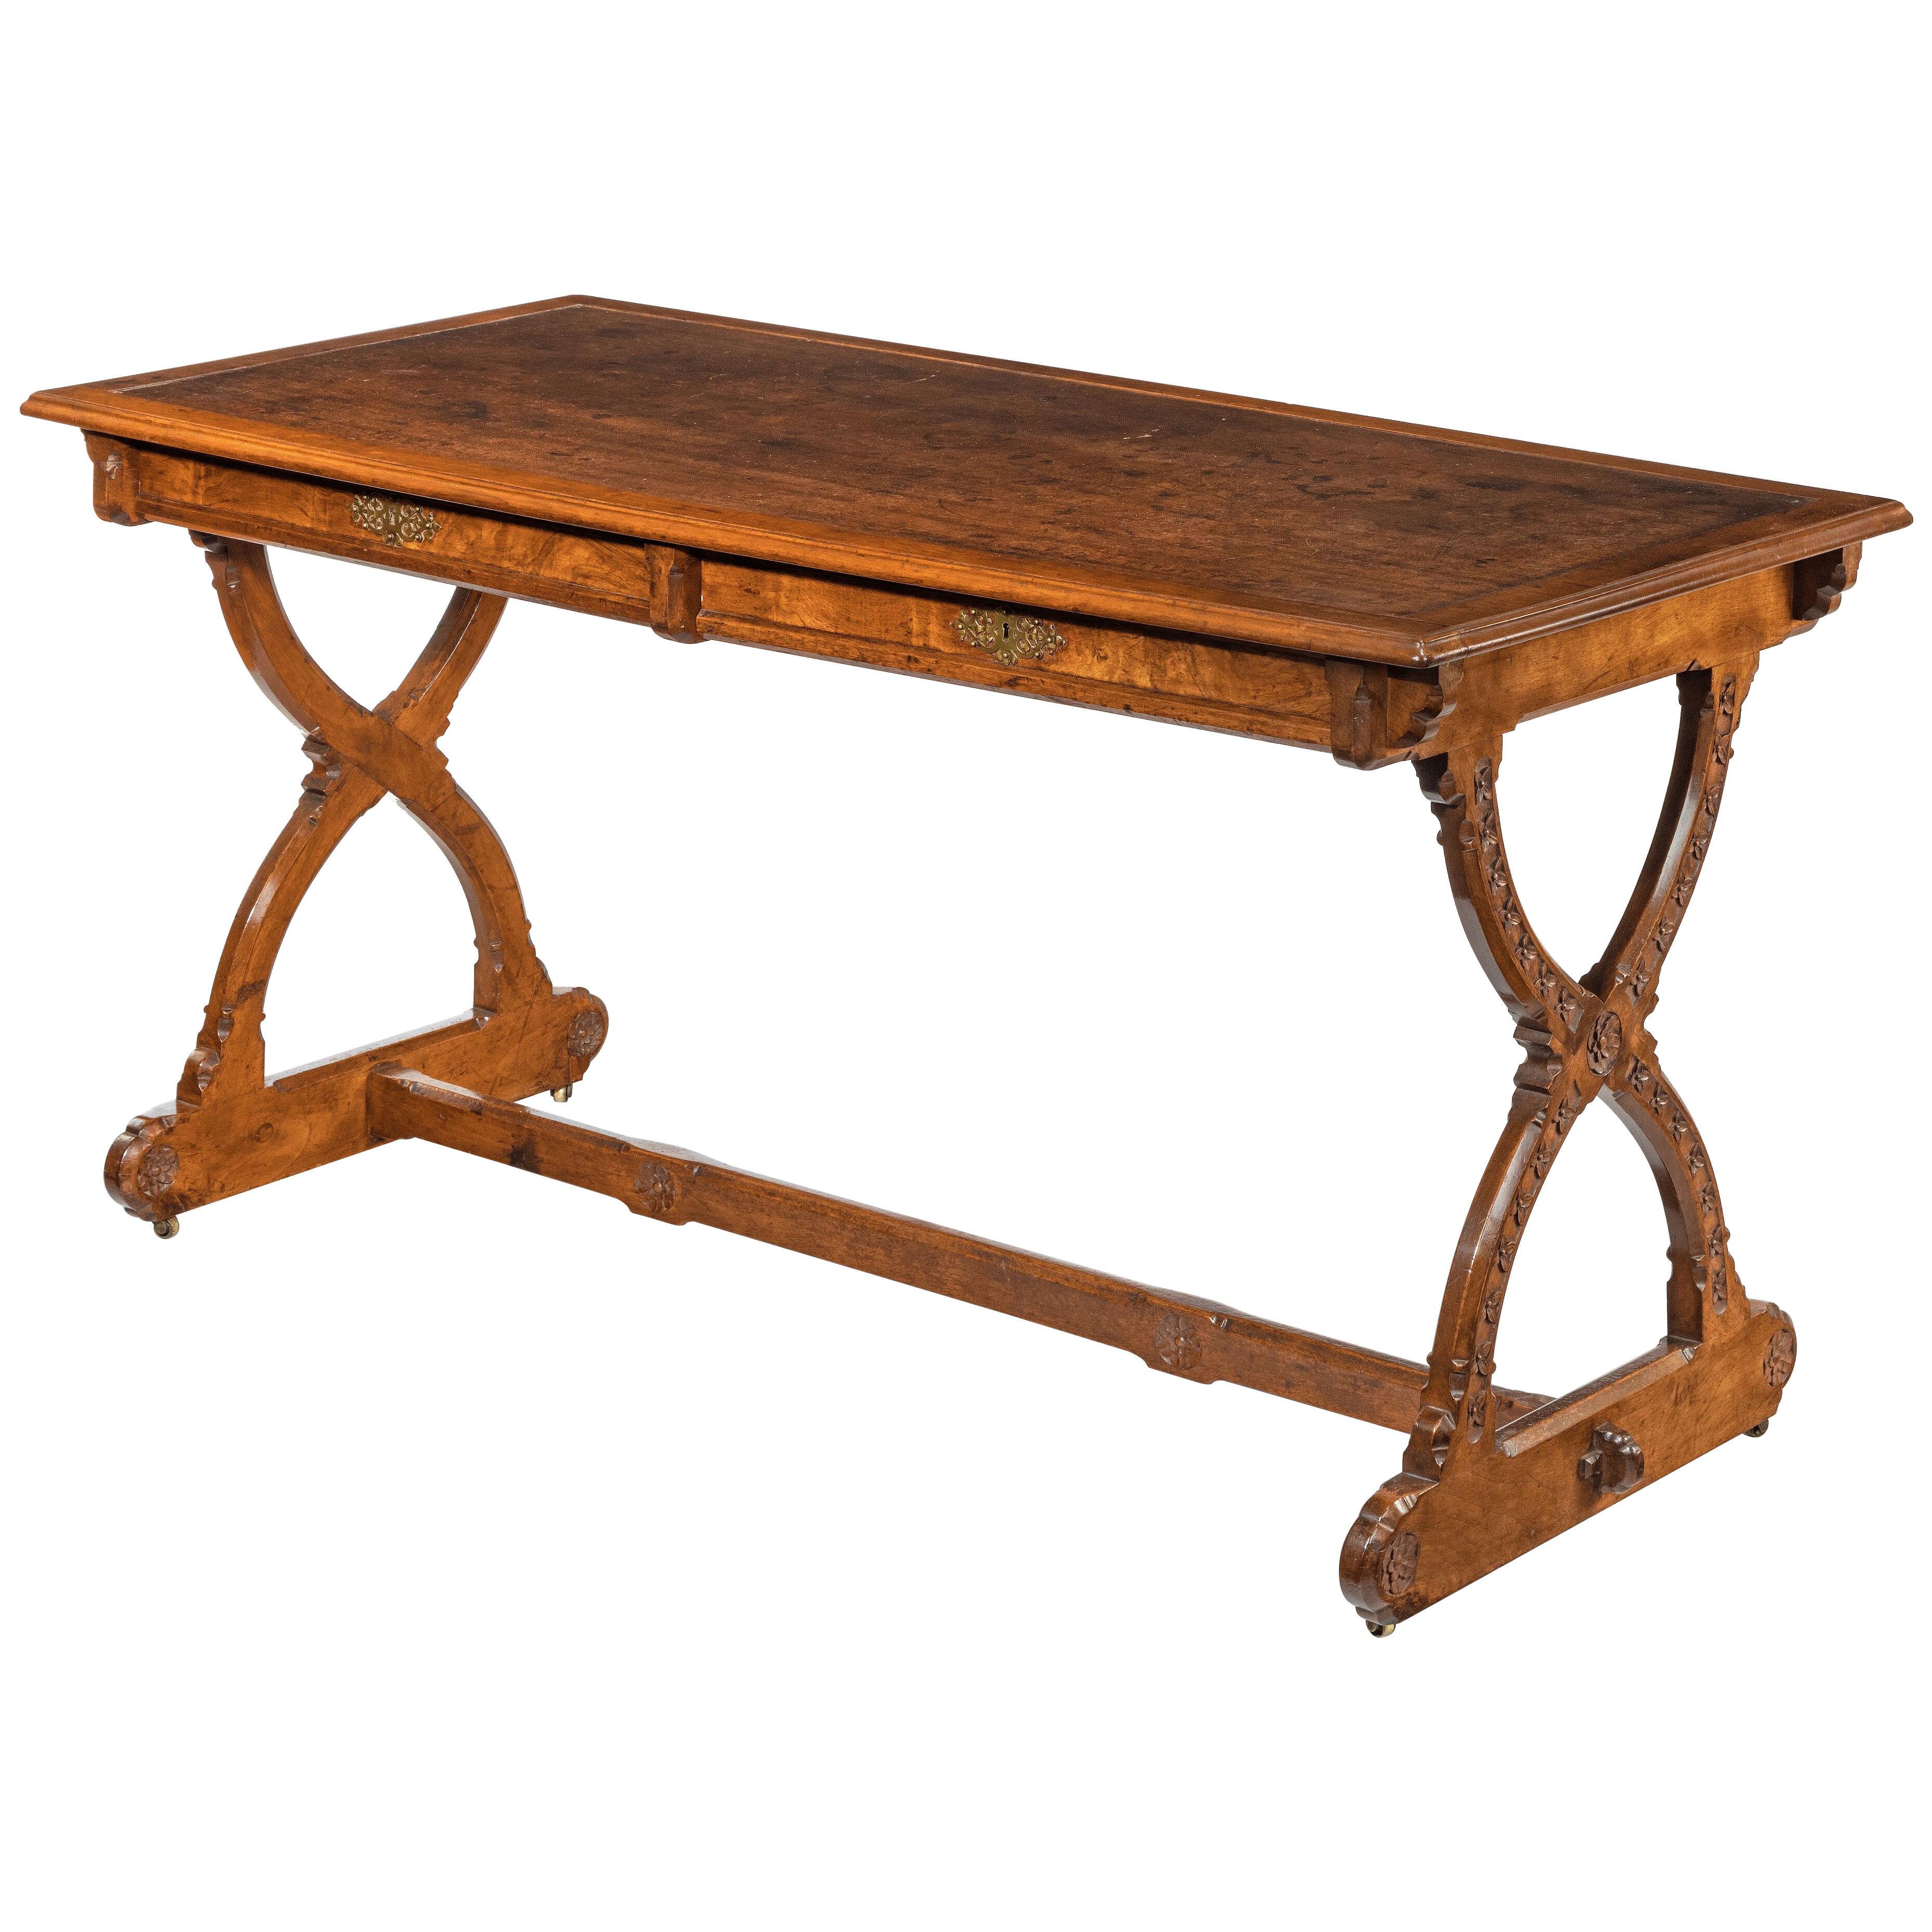 Gothic Revival walnut writing table, attributed to Crace & Co.